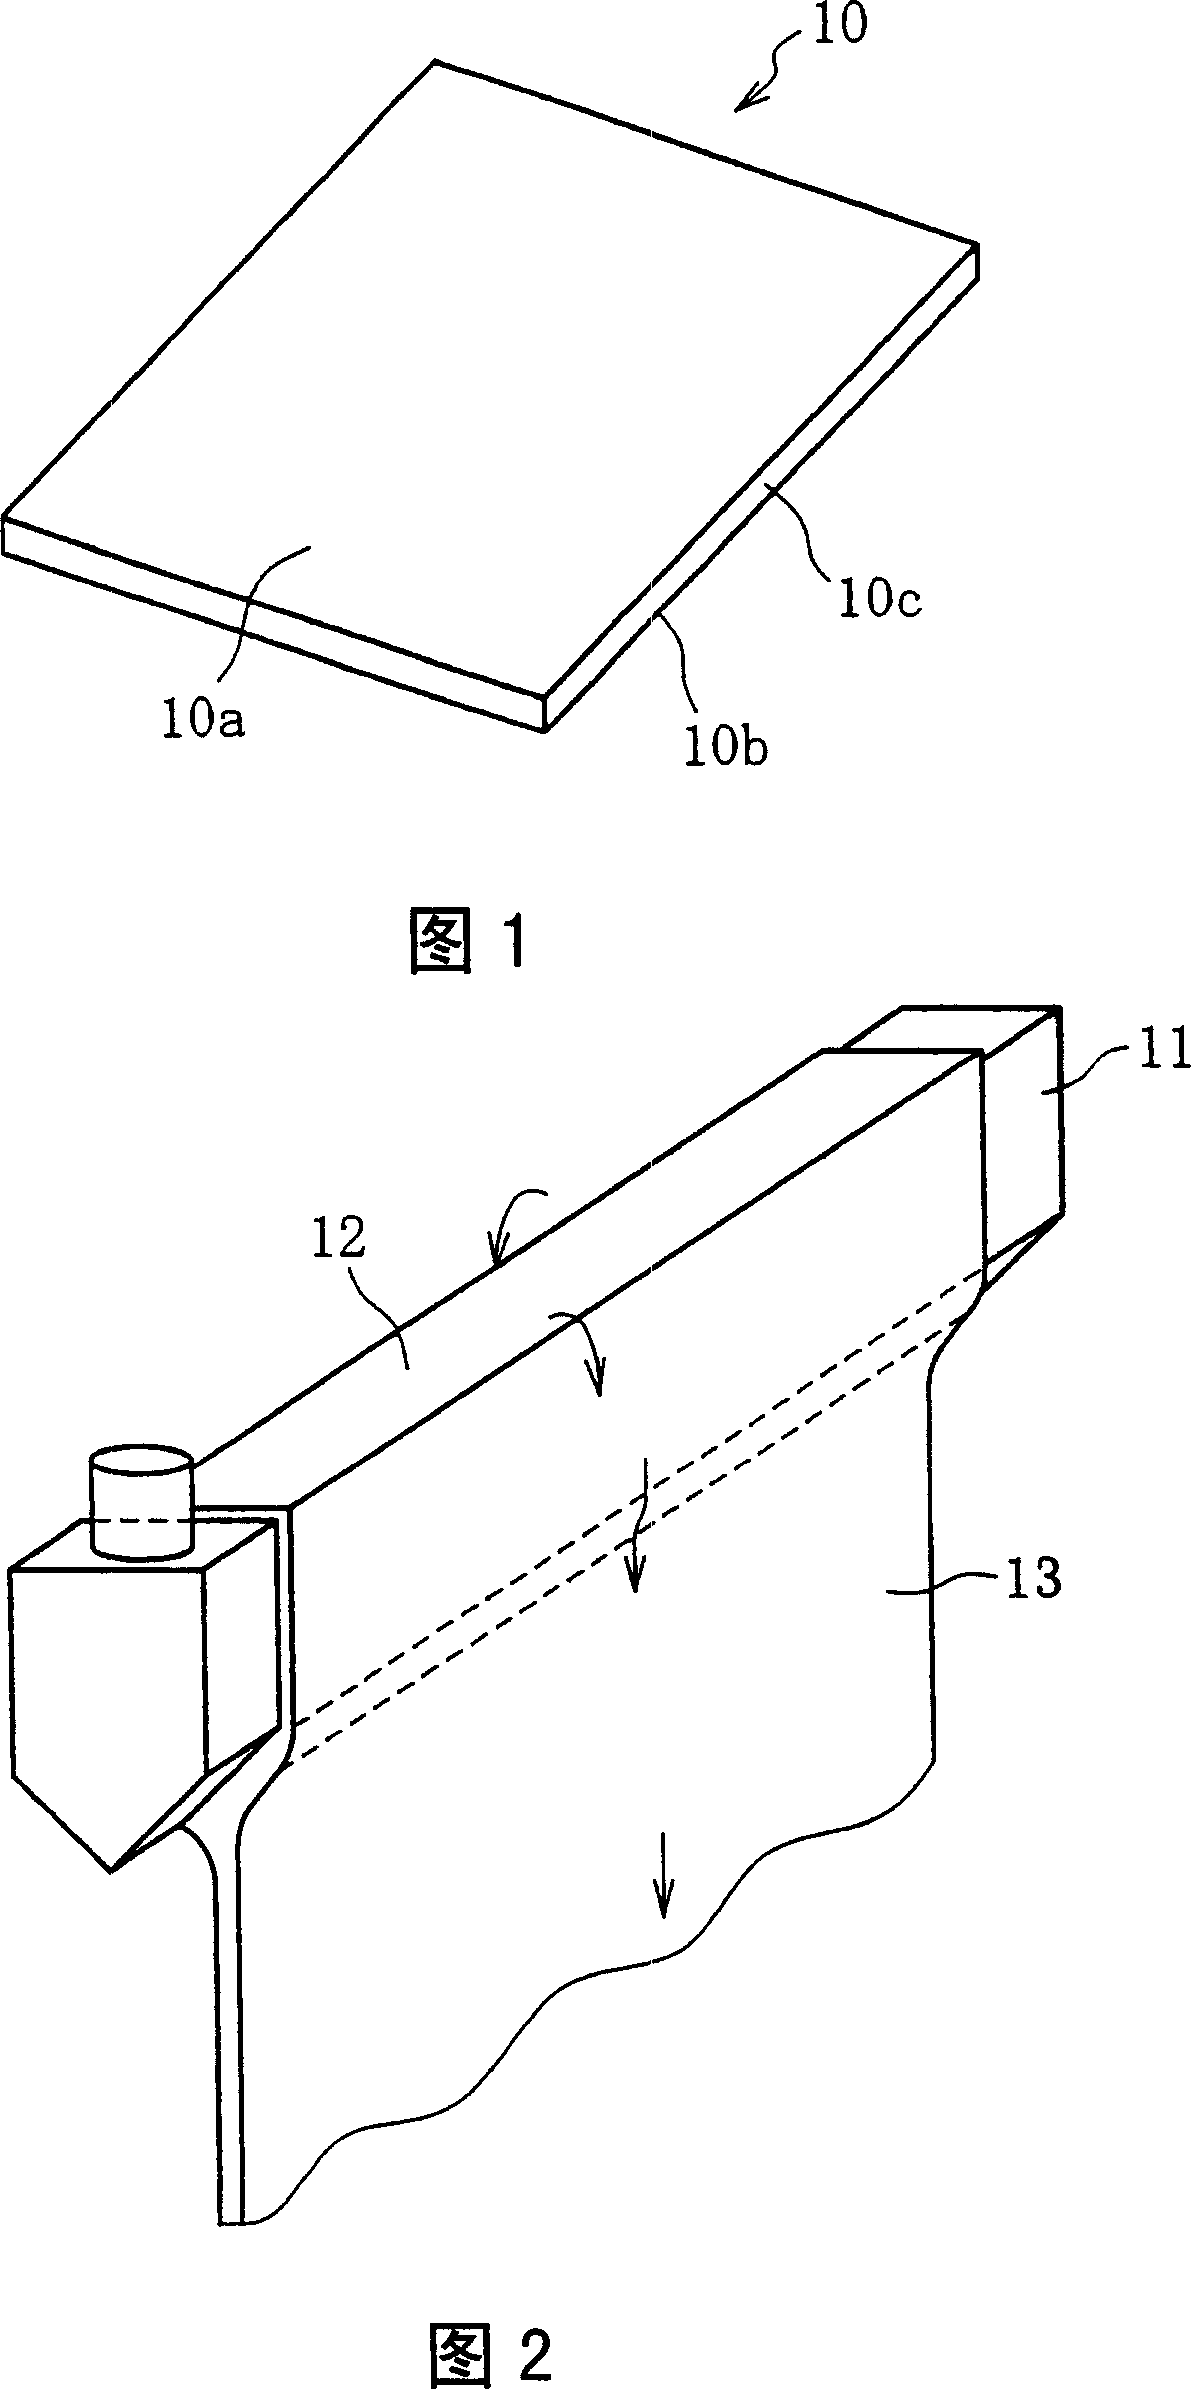 Cover glass for semiconductor package and method for producing same